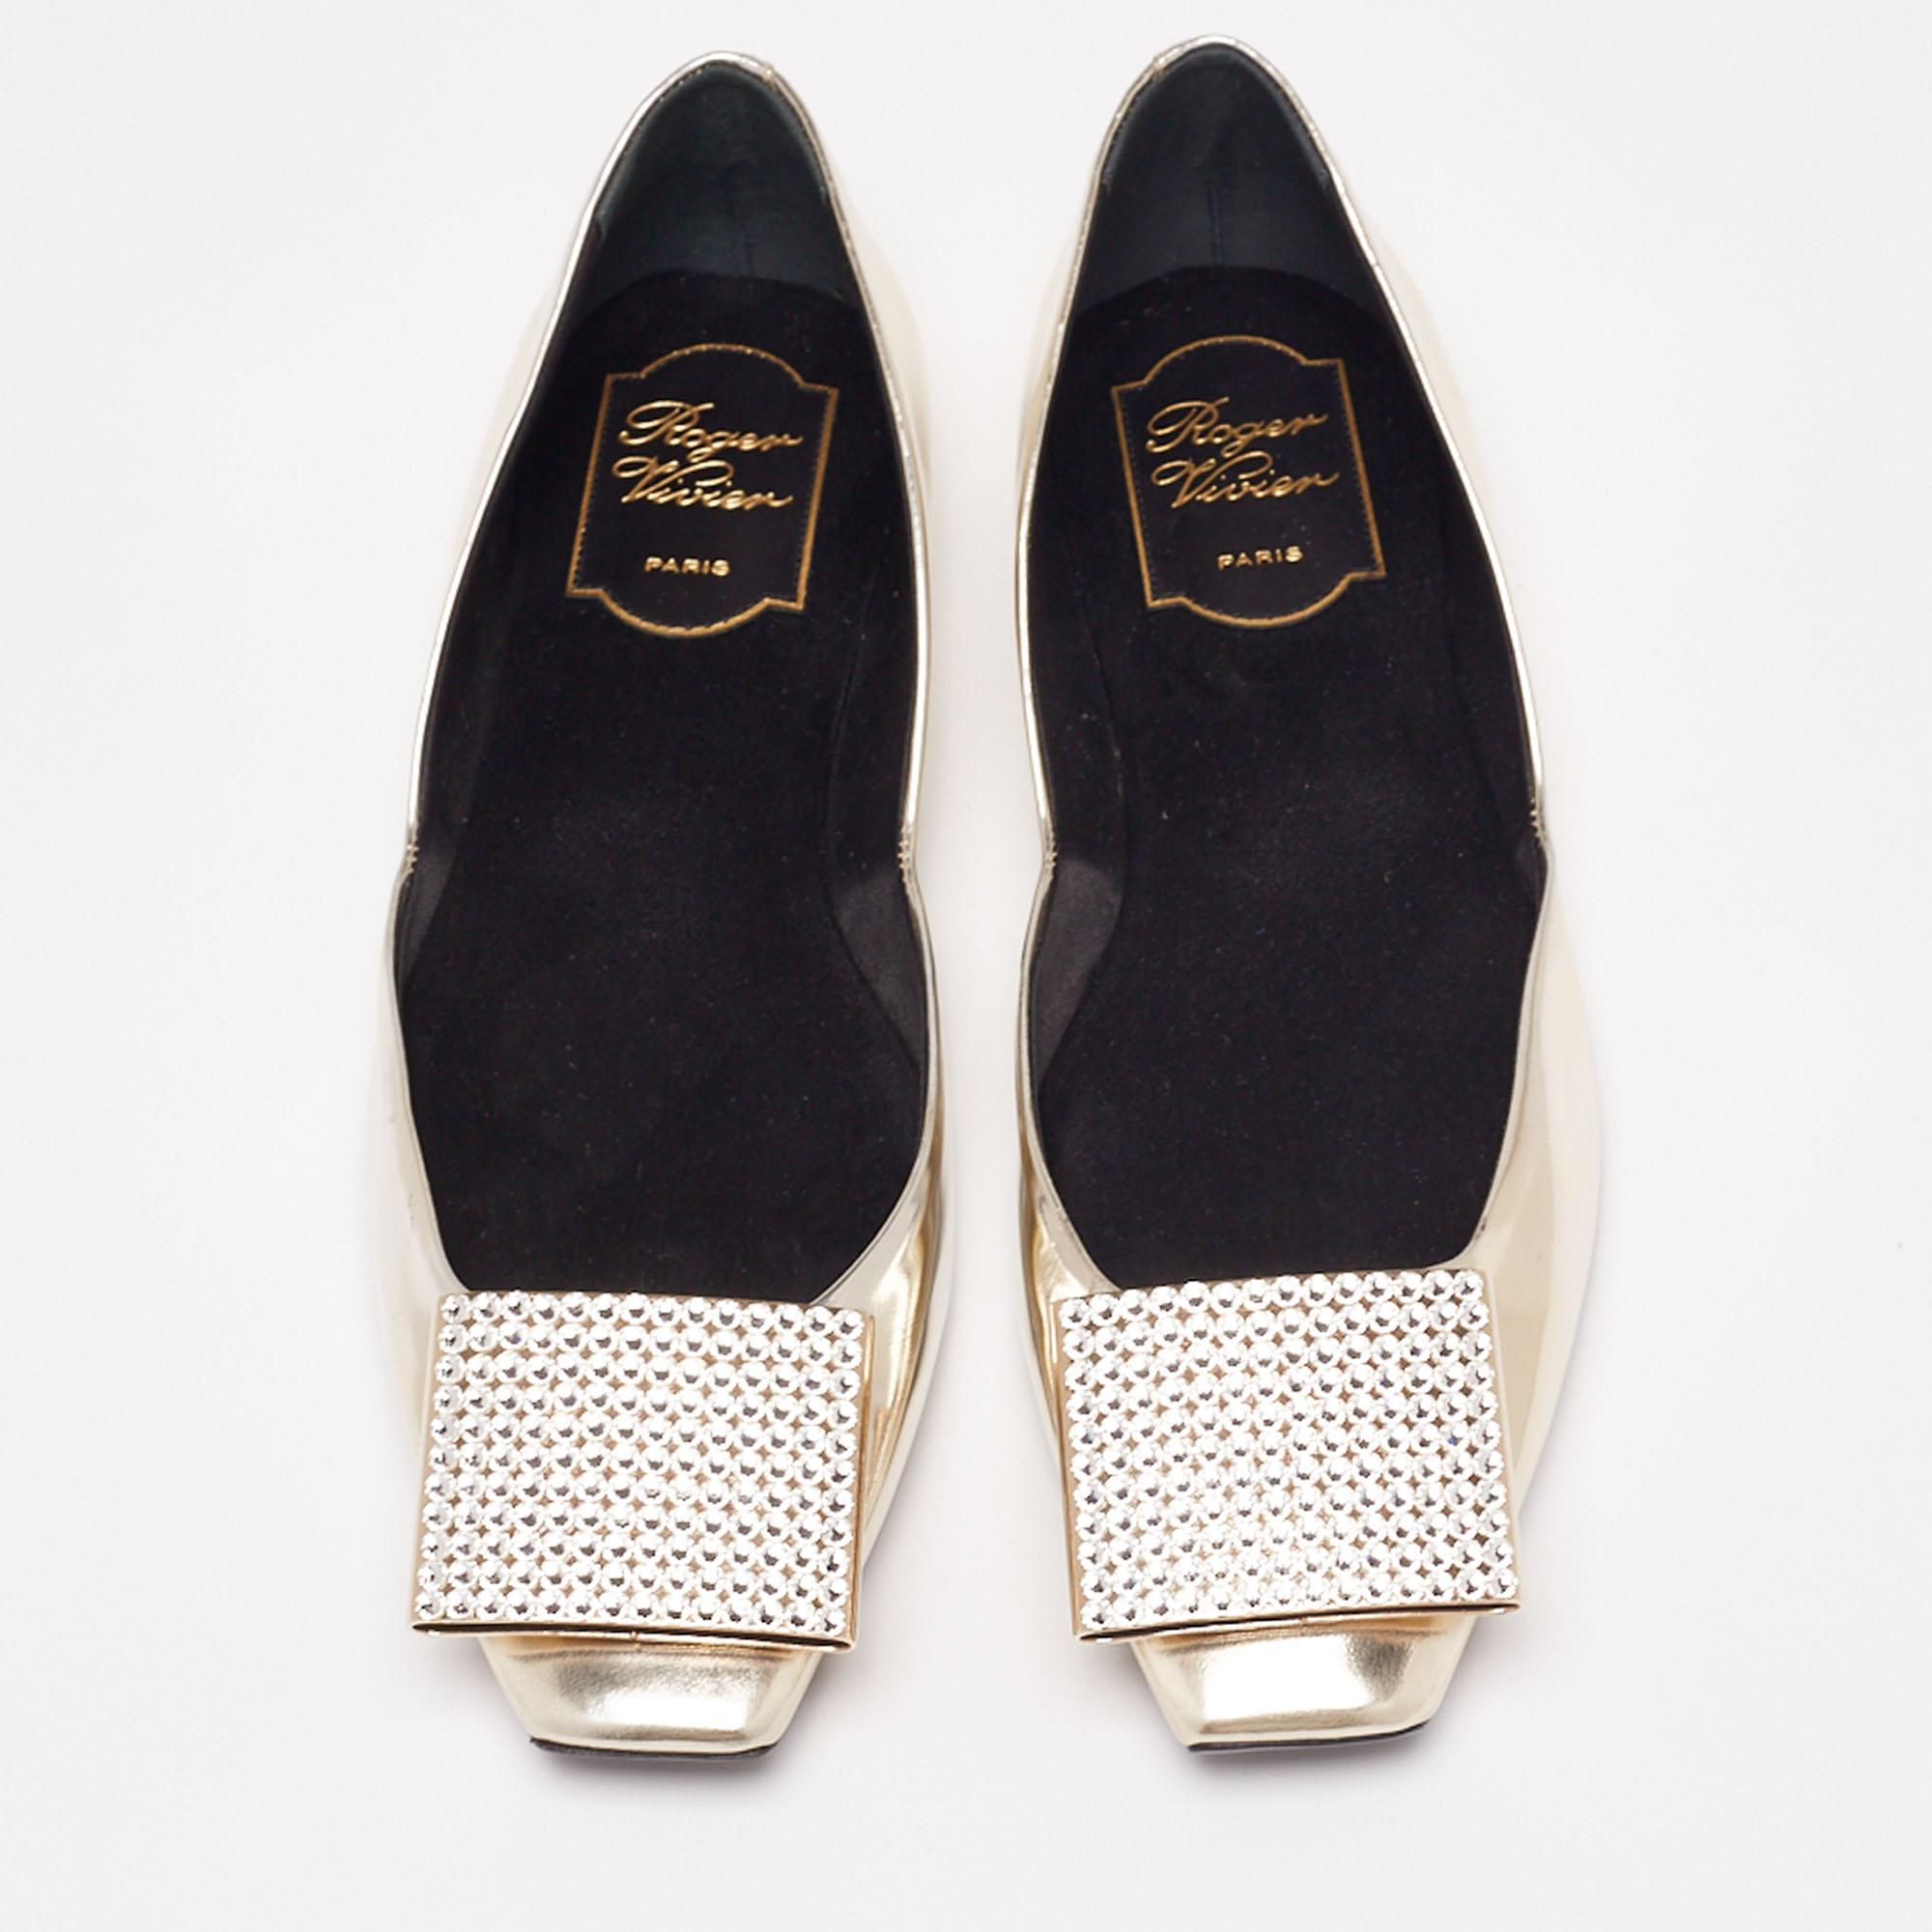 The precise cuts and the crystal embellishment add an elegant touch to these Roger Vivier ballet flats. Crafted from gold leather, they make for an ideal party accessory. The slip-on fitting of the pair makes it functional and comfortable.

